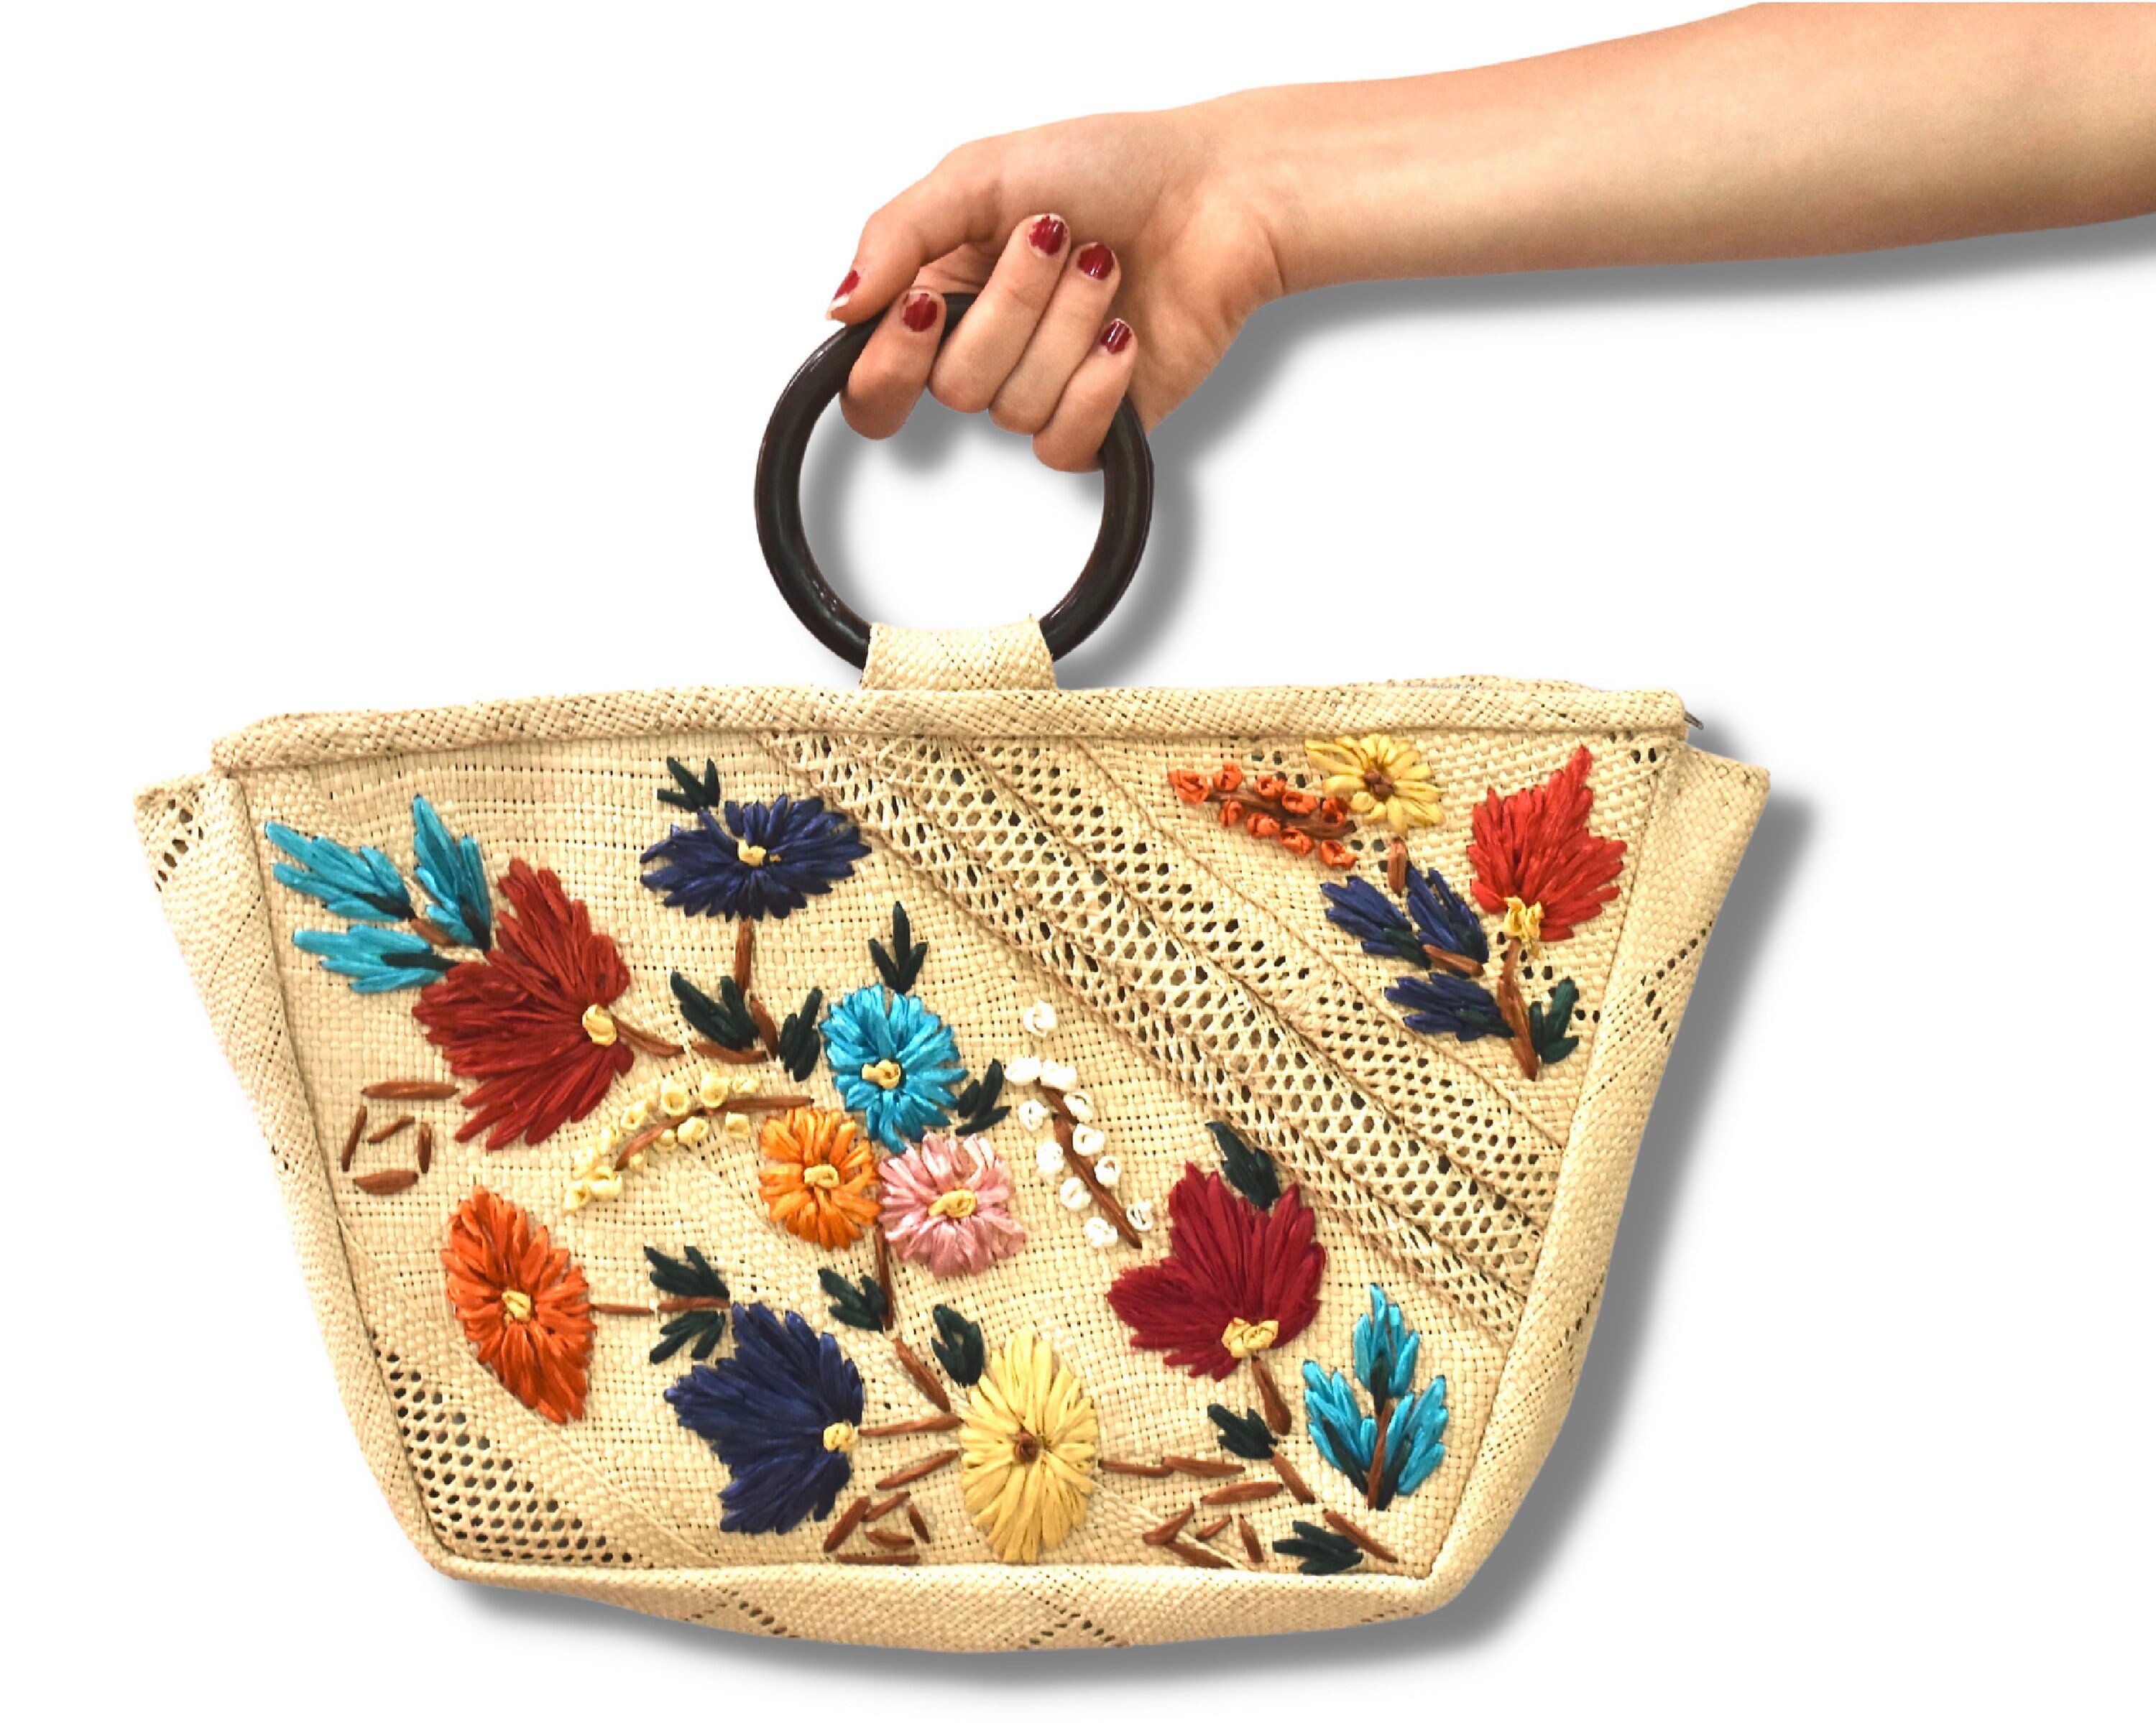 Antique Bag Bloomsbury Style Flower Embroidered Bags & Purses Handbags Clutches & Evening Bags 